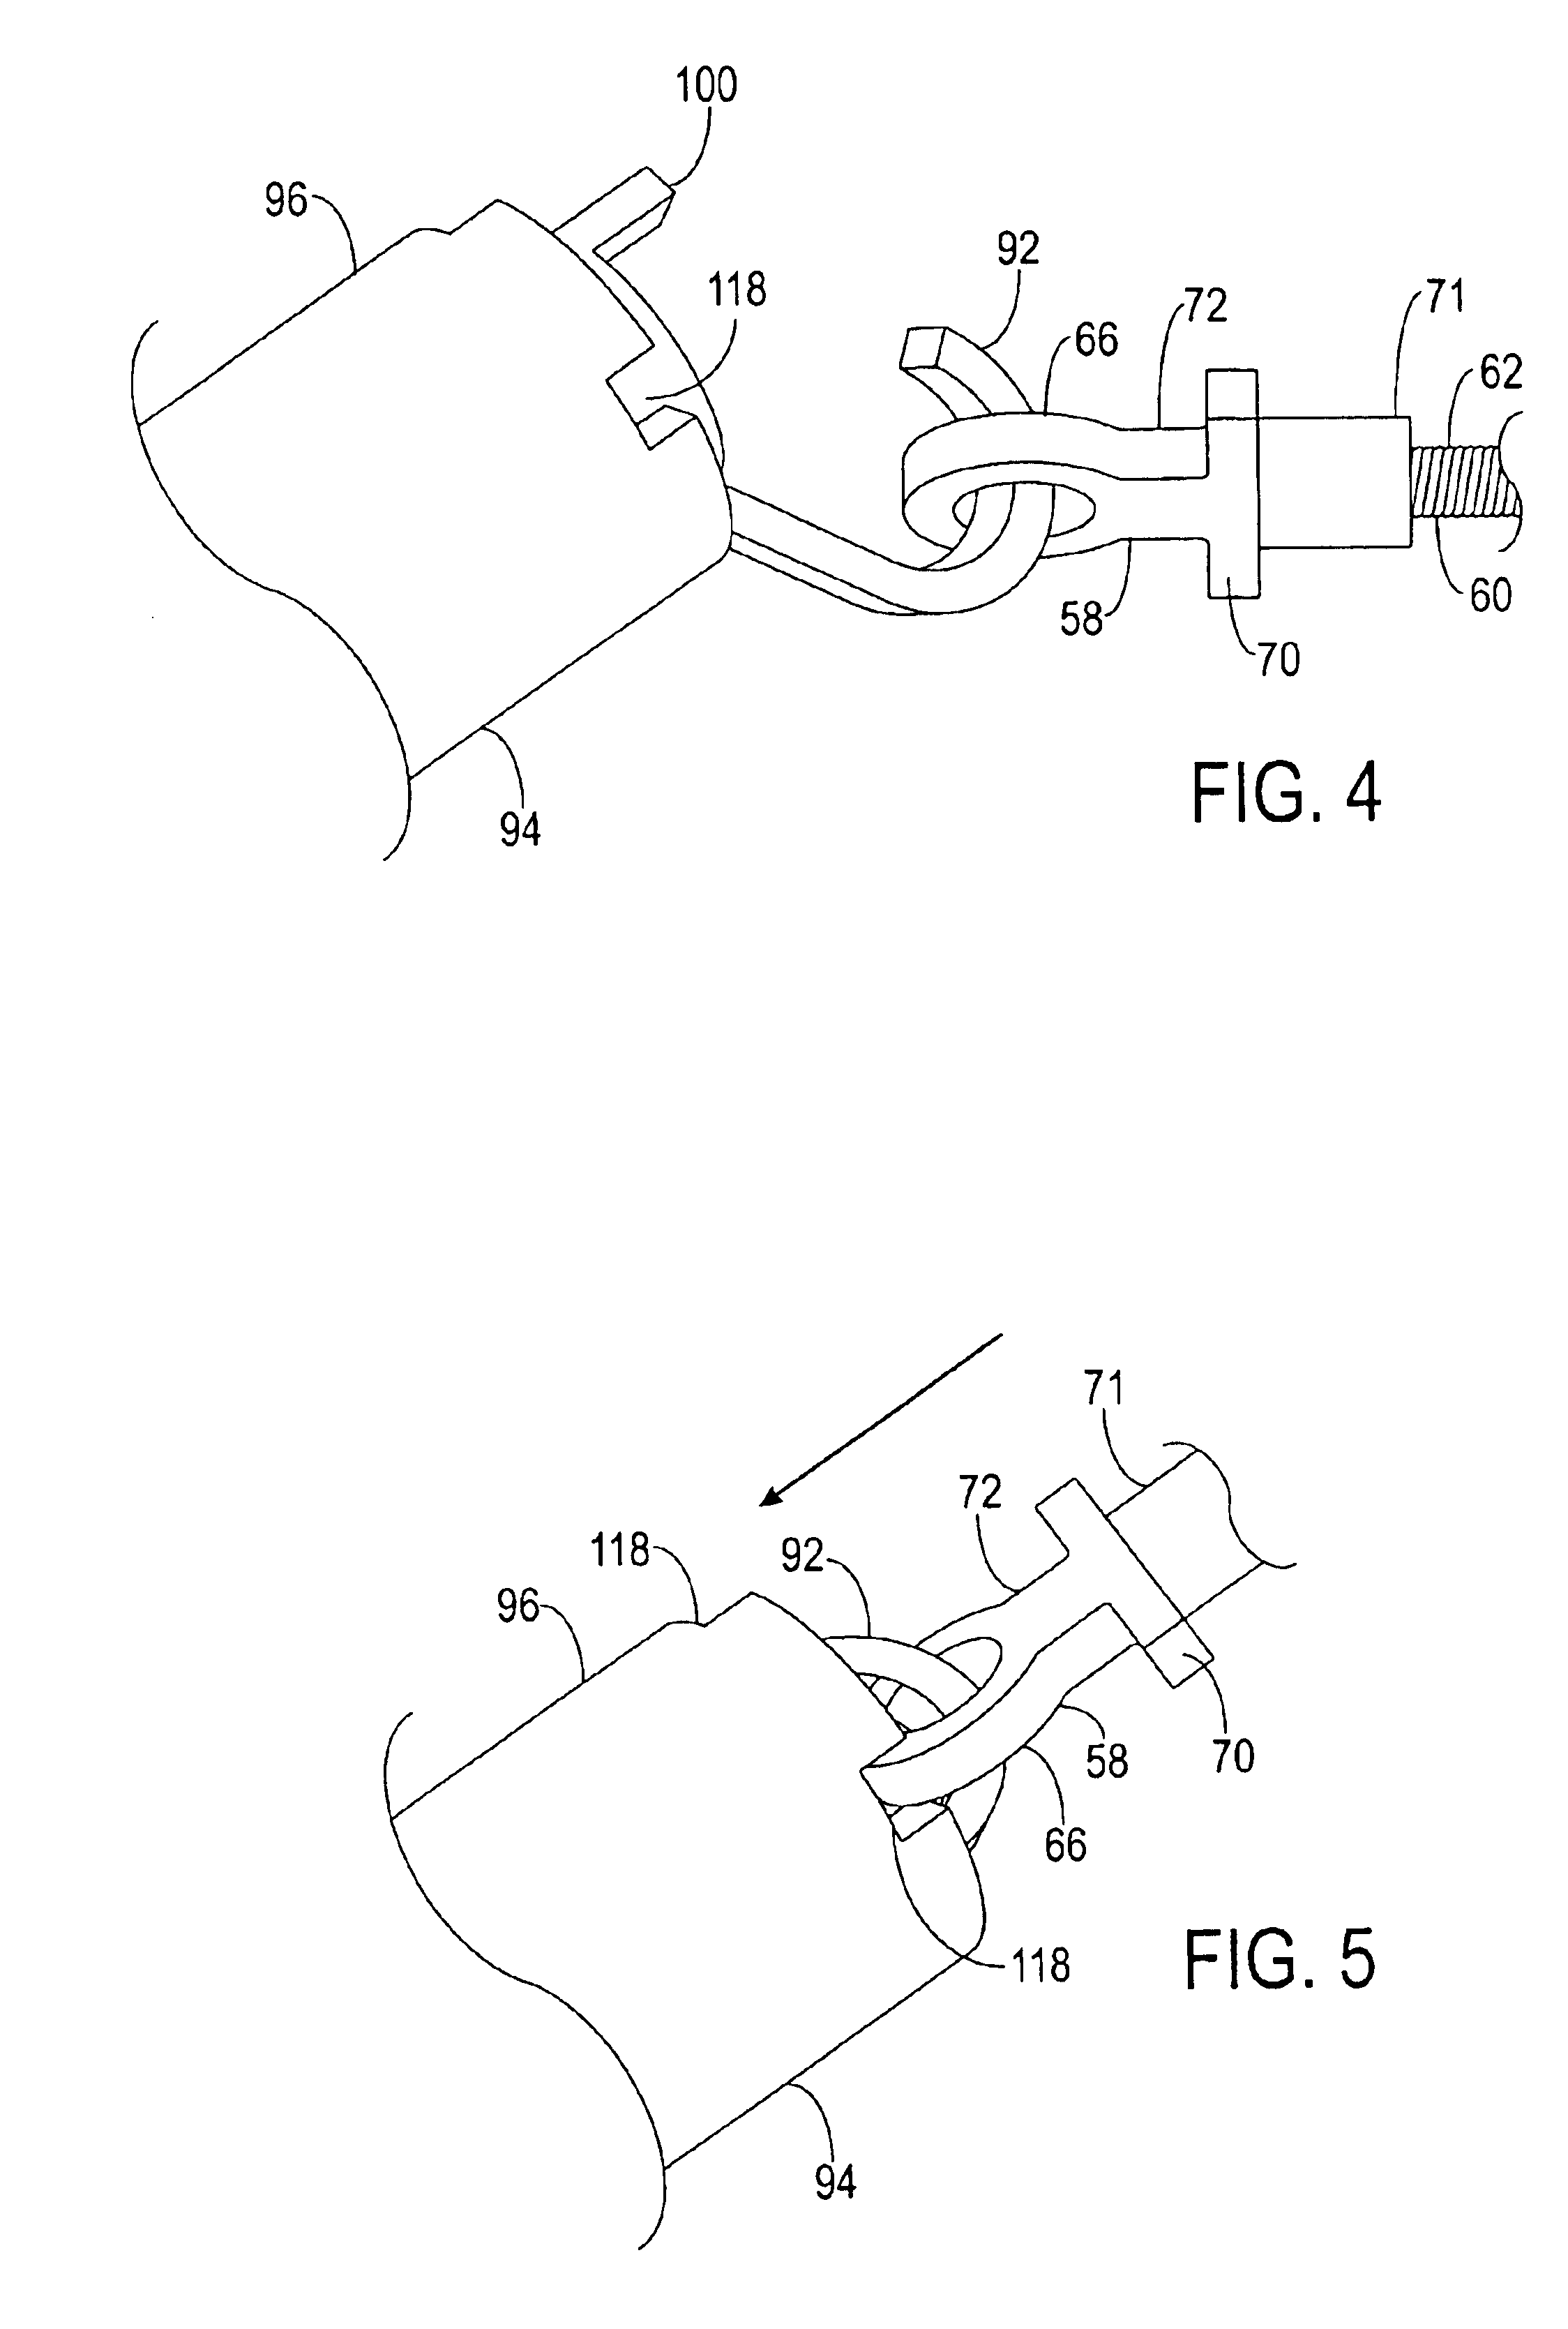 Clamp for a vibration damper and method of installing same